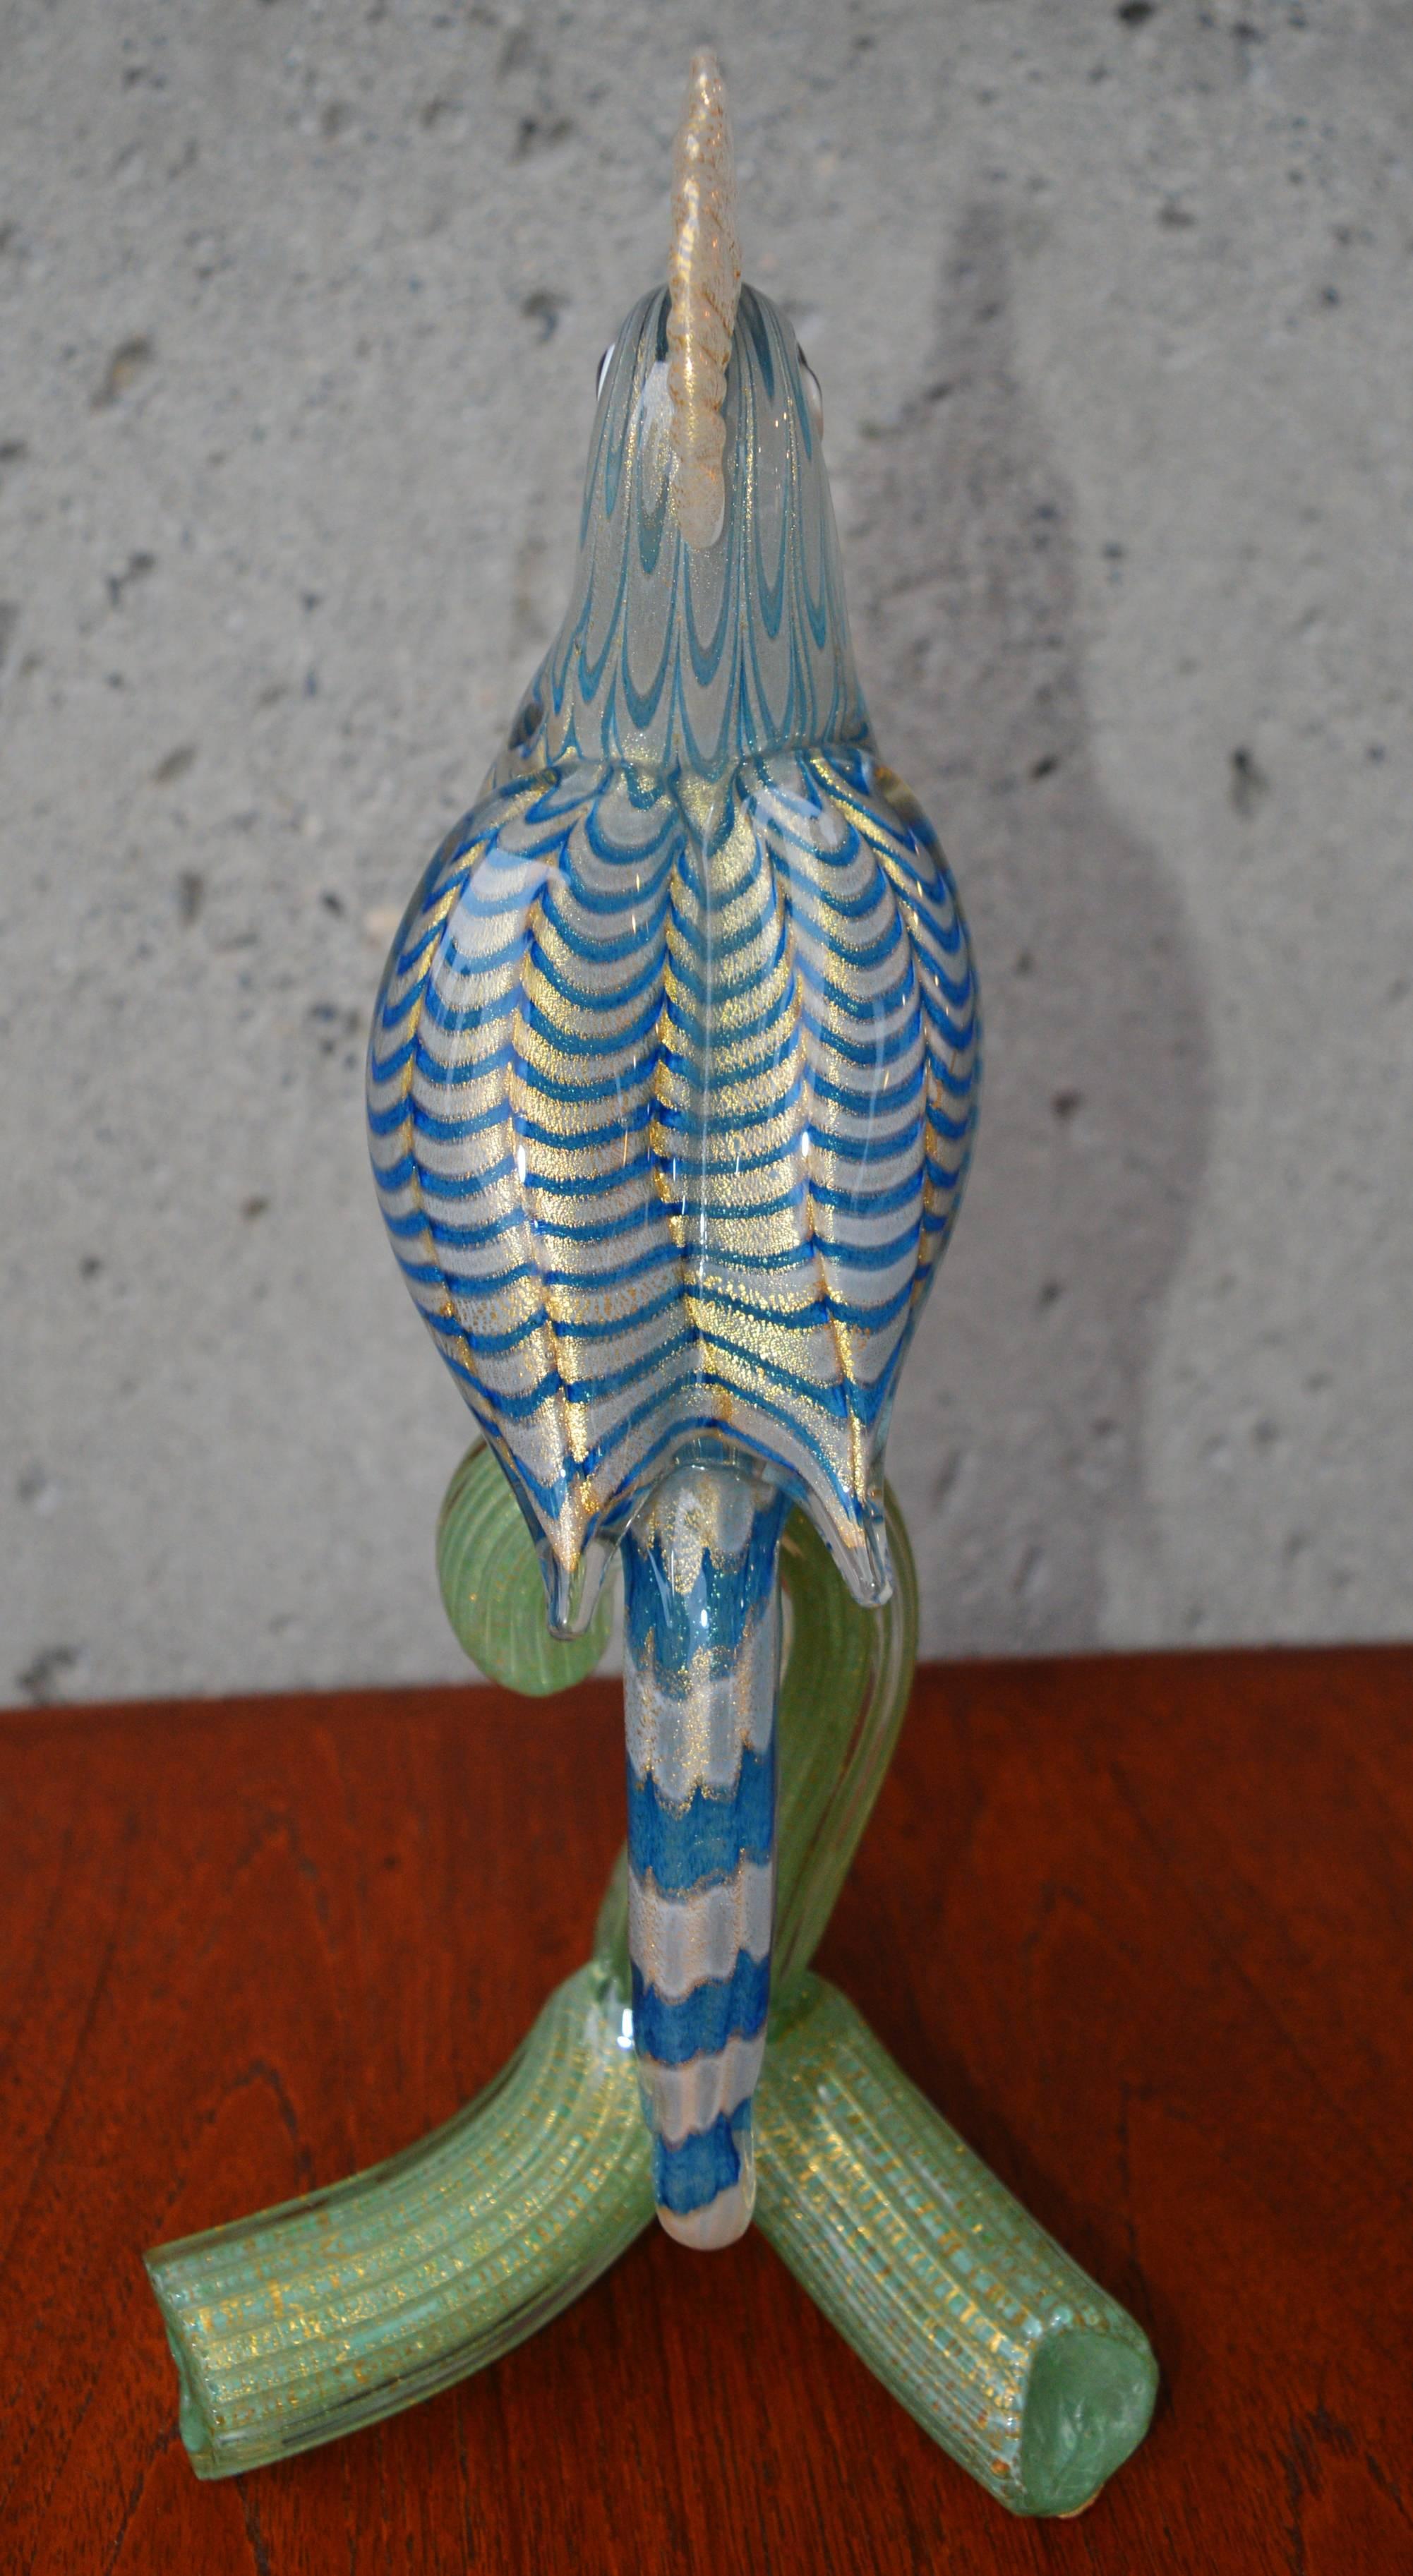 This incredibly striking large-scale handblown art glass parrot figurine has impeccable detailing throughout. The waved pattern of blue and gold in the feathers is very realistic, and the green and gold base a perfect contrast. In fabulous condition